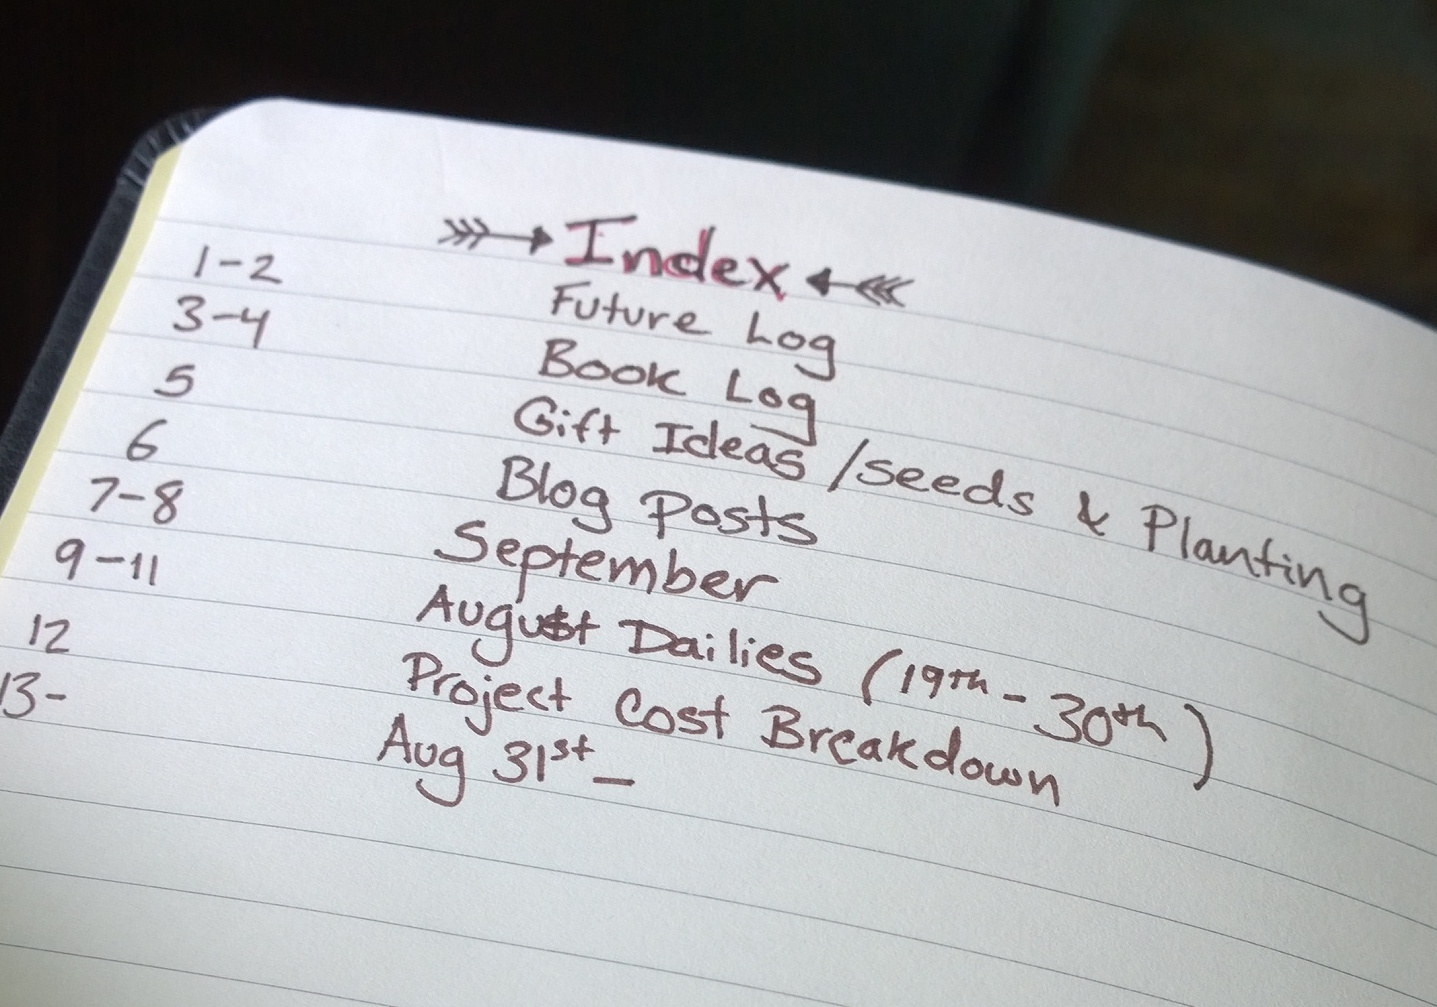 The Bullet Journal for Bloggers - 13 Easy Ways to Organize Your Blog